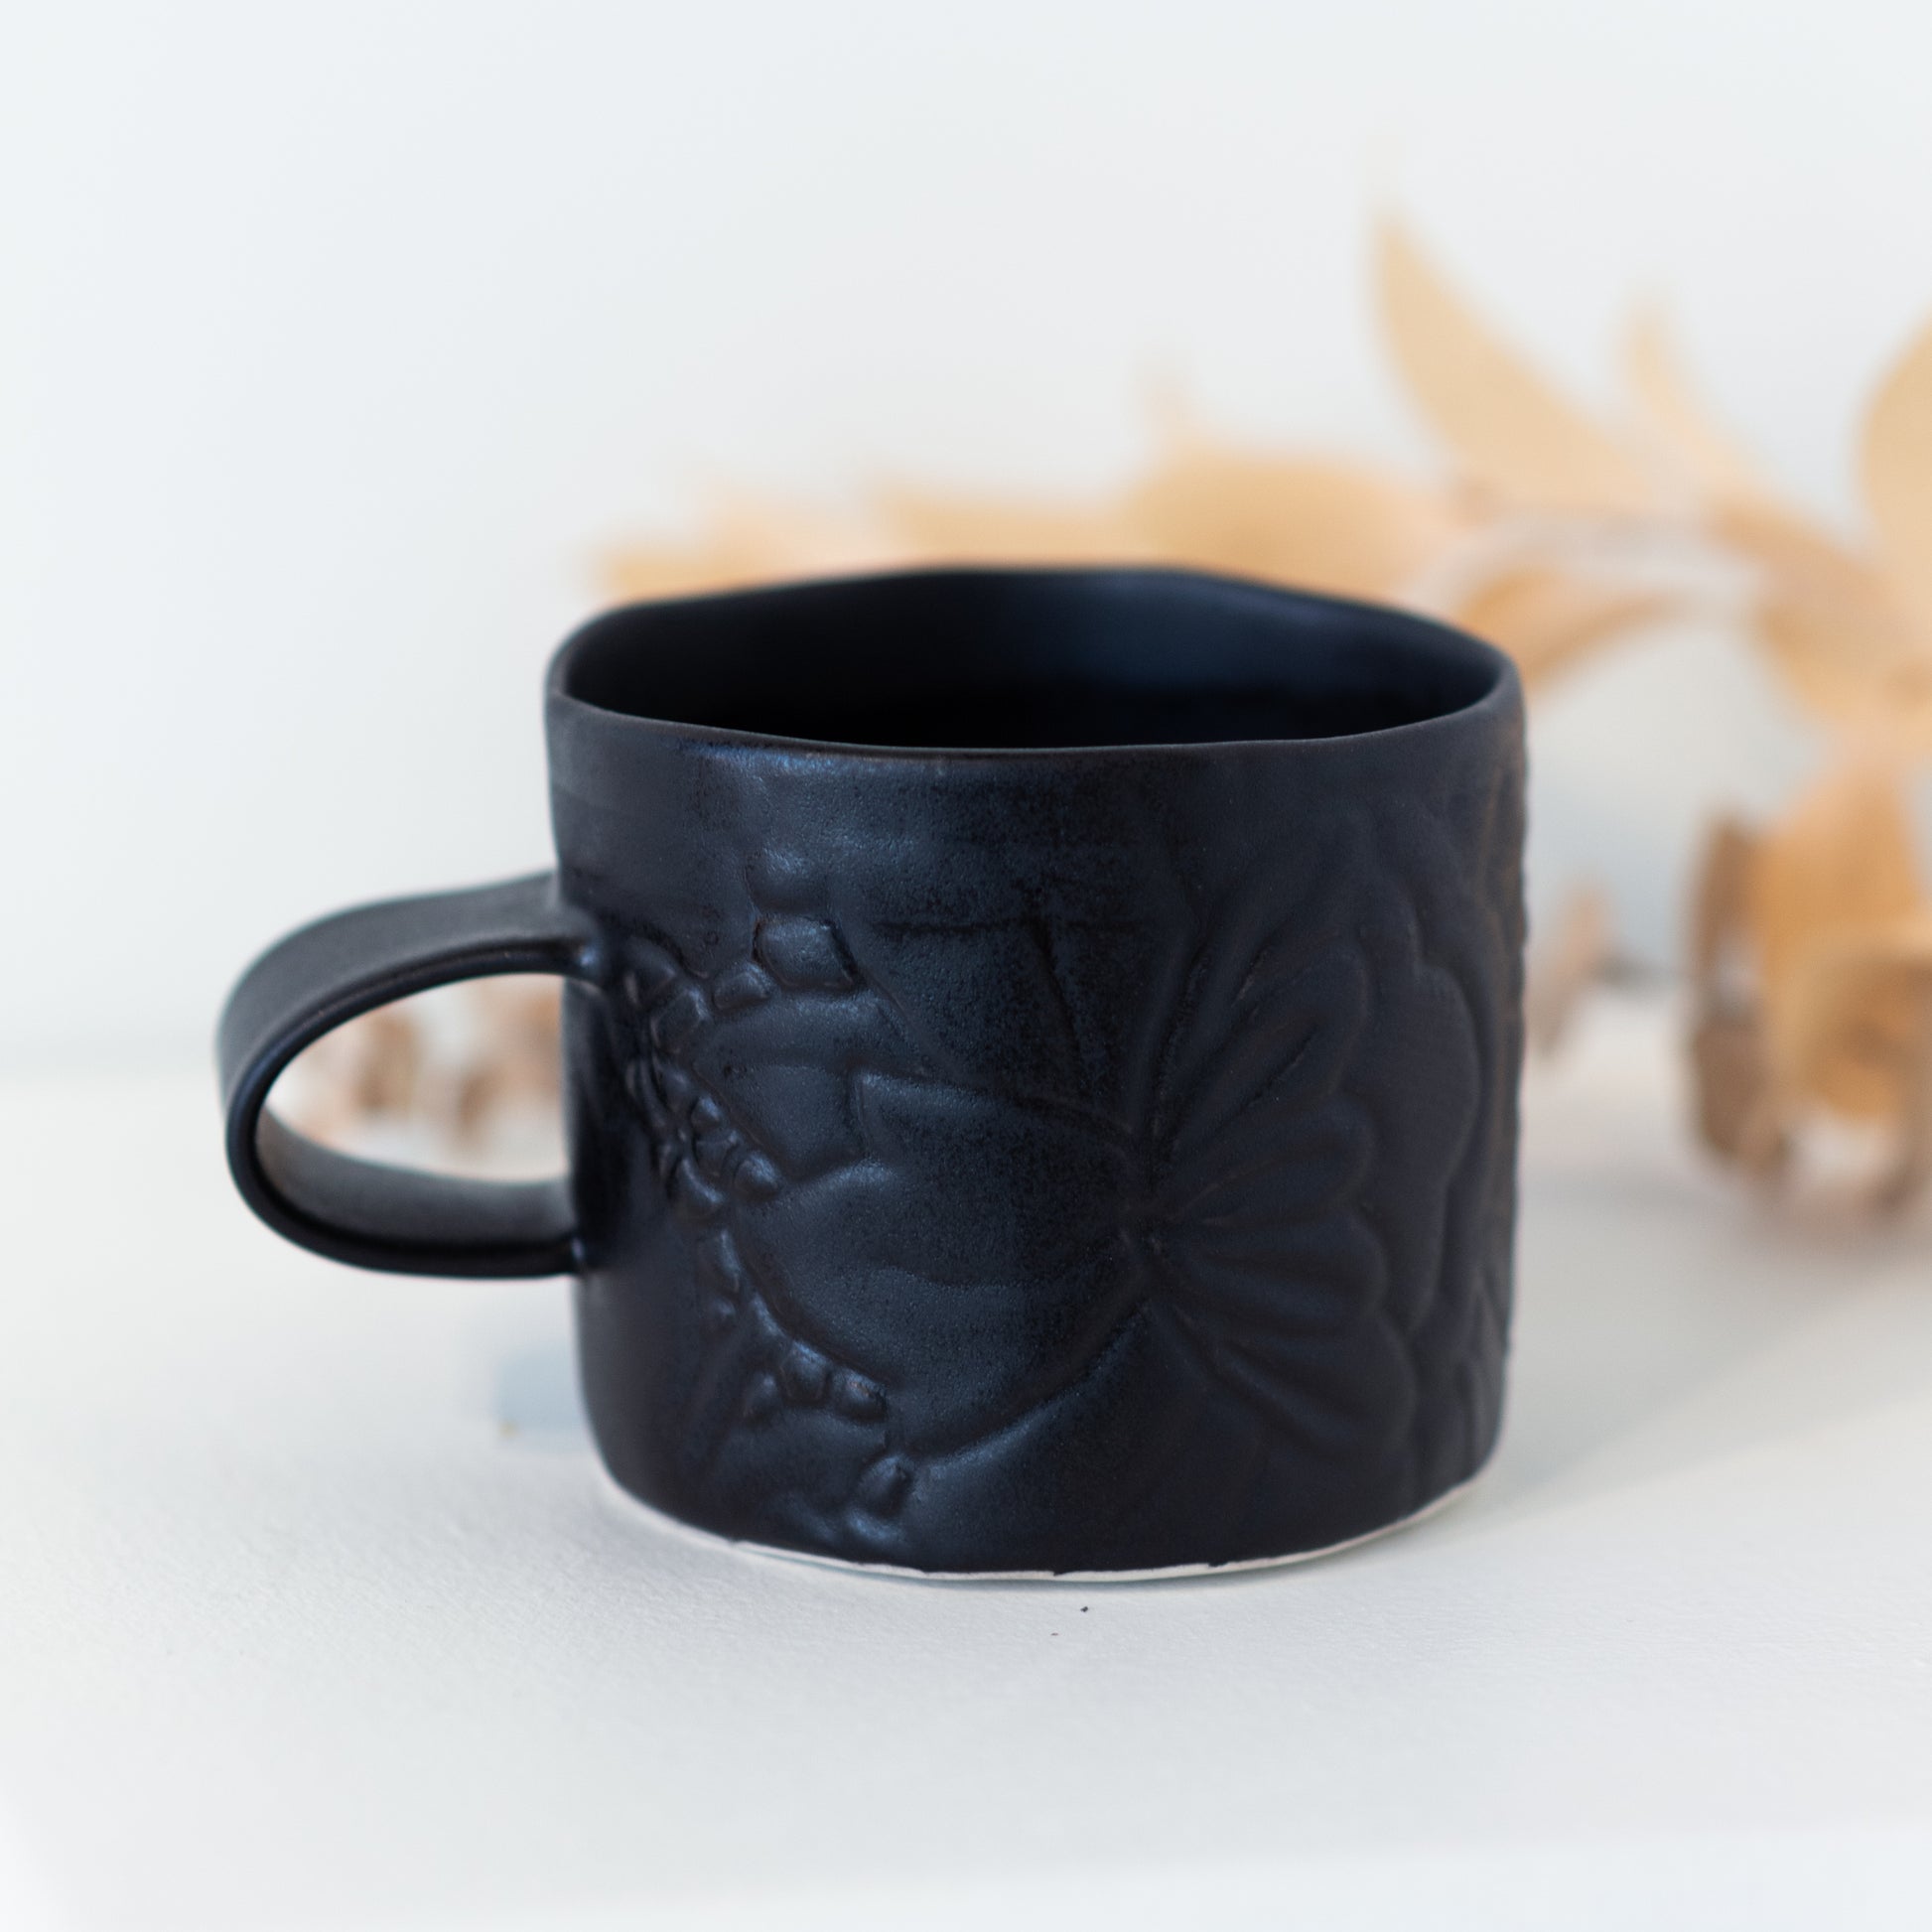 Black mug with subtle floral patterning in front of a yellow plant.